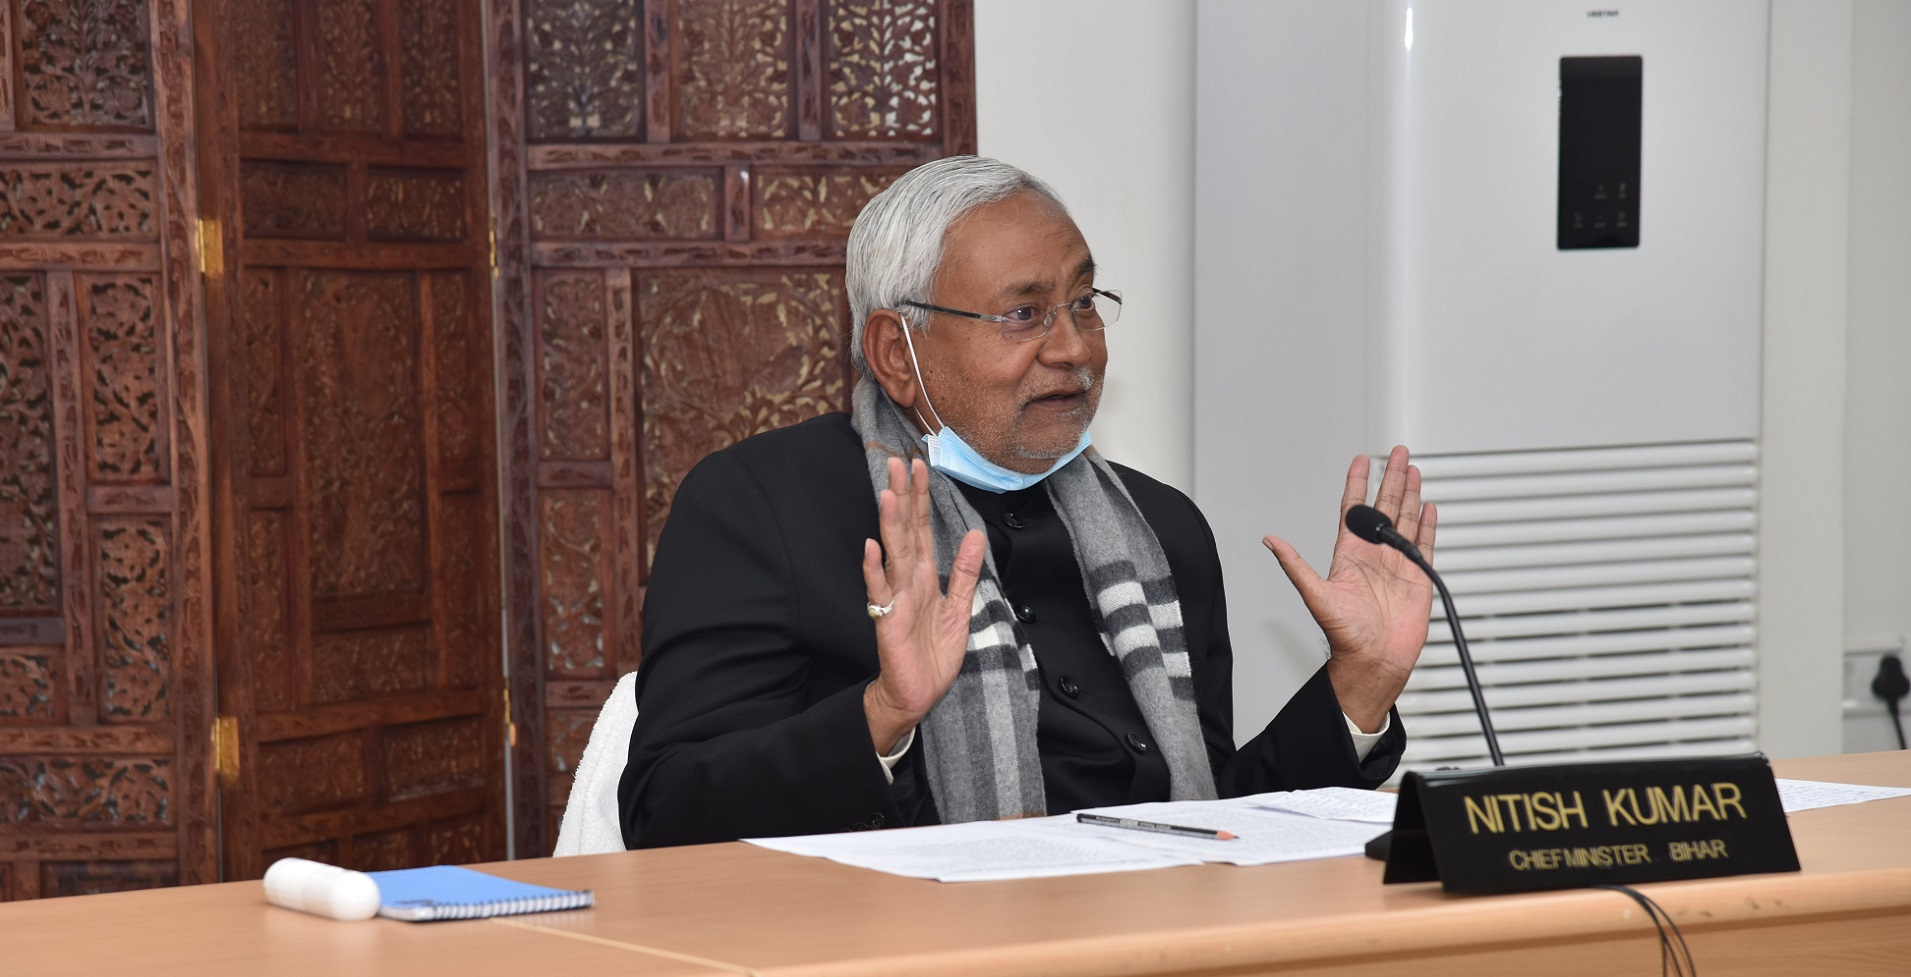 Nitish Kumar must bridge political-economic divide with balanced choices on policy fronts